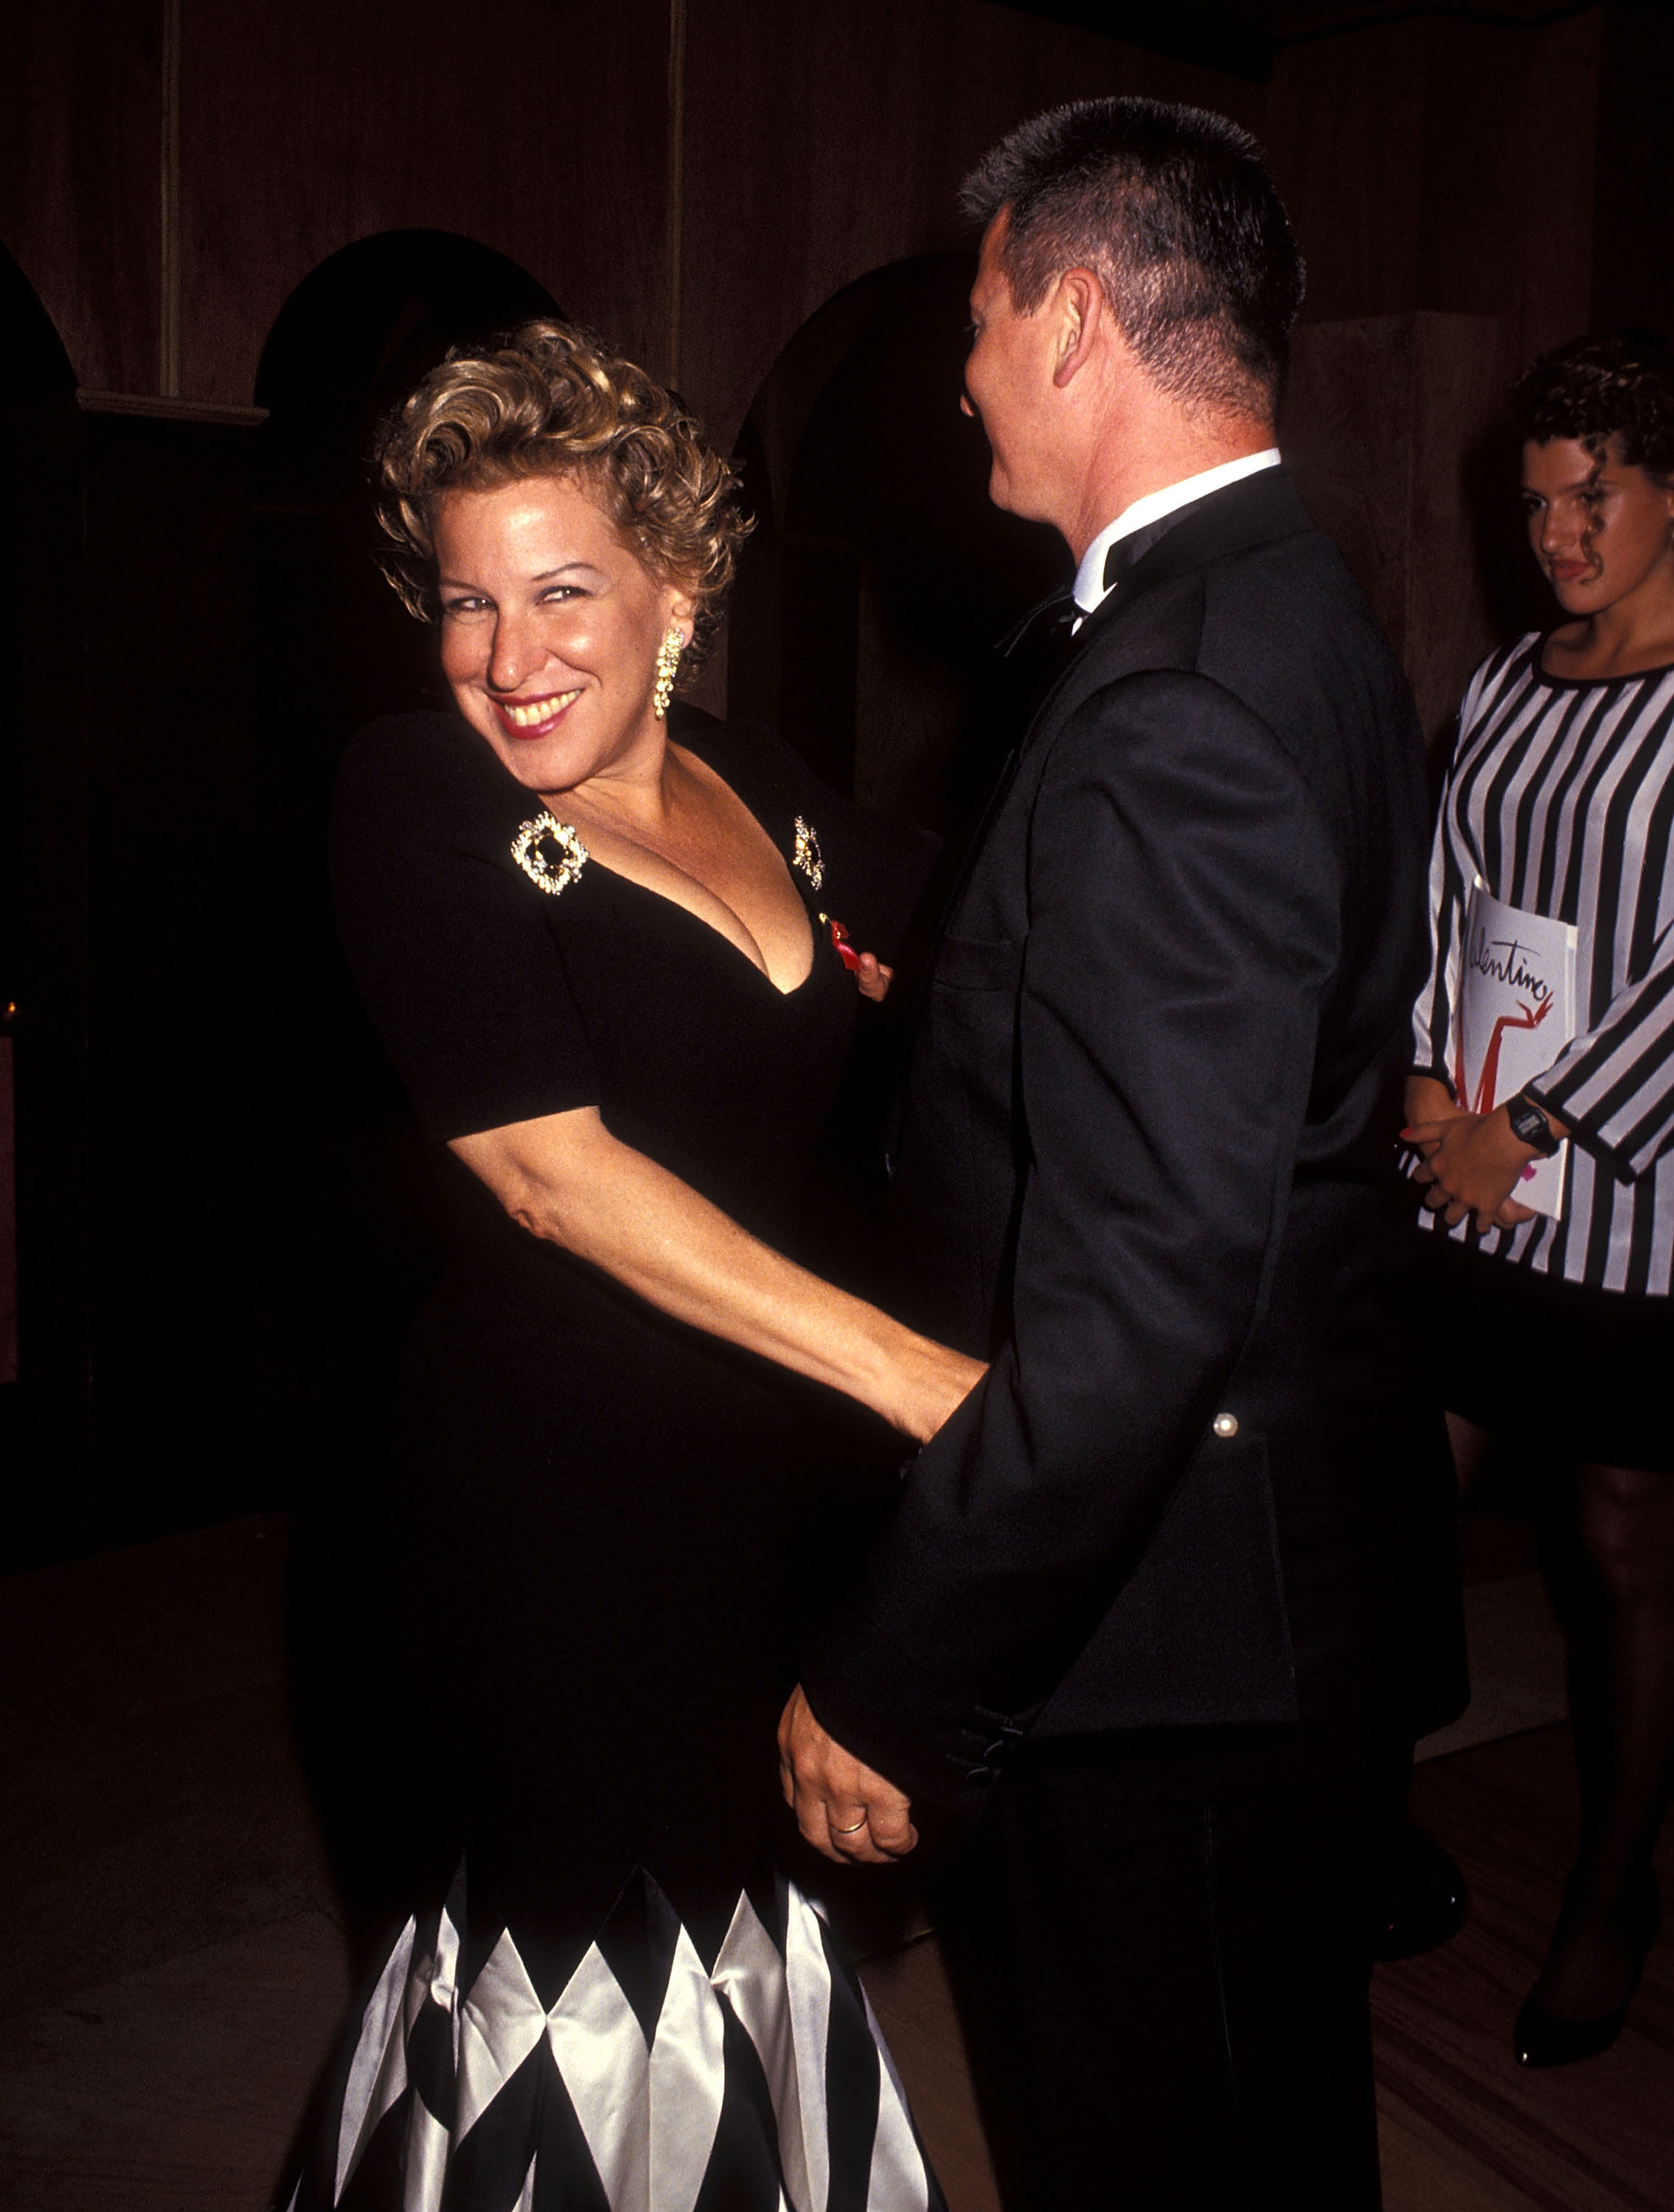 Bette Midler and Martin von Haselberg in New York in 1992 | Source: Getty Images